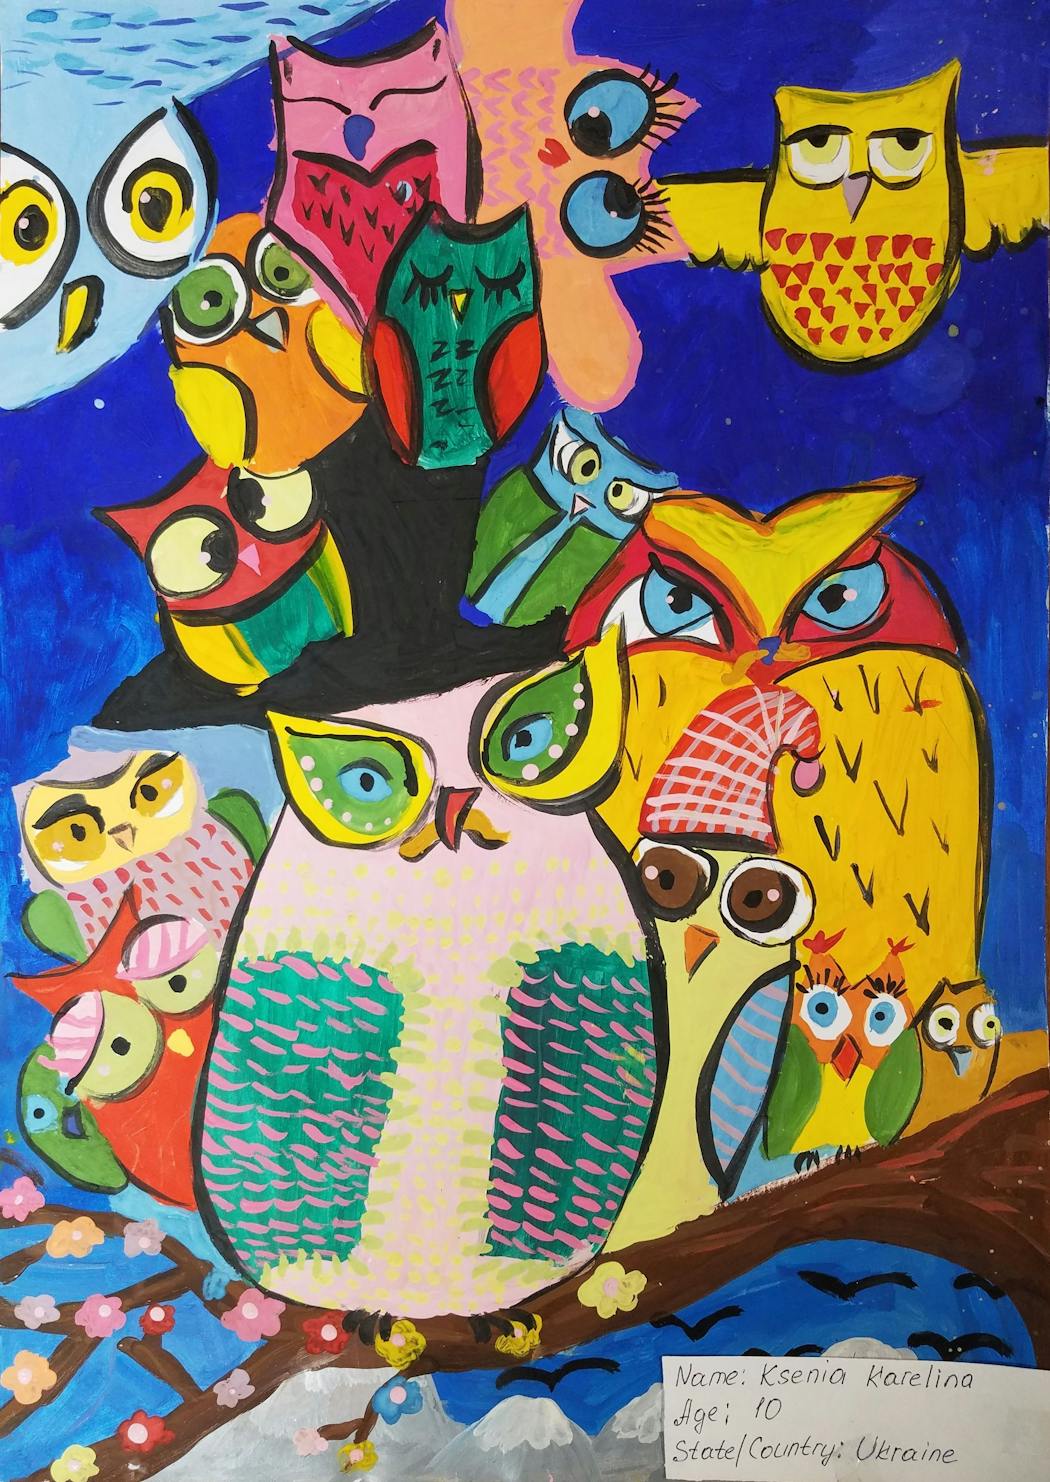 Minnesota’s International Owl Center is hosting a benefit auction that includes this painting by a 10-year-old Ukrainian girl.